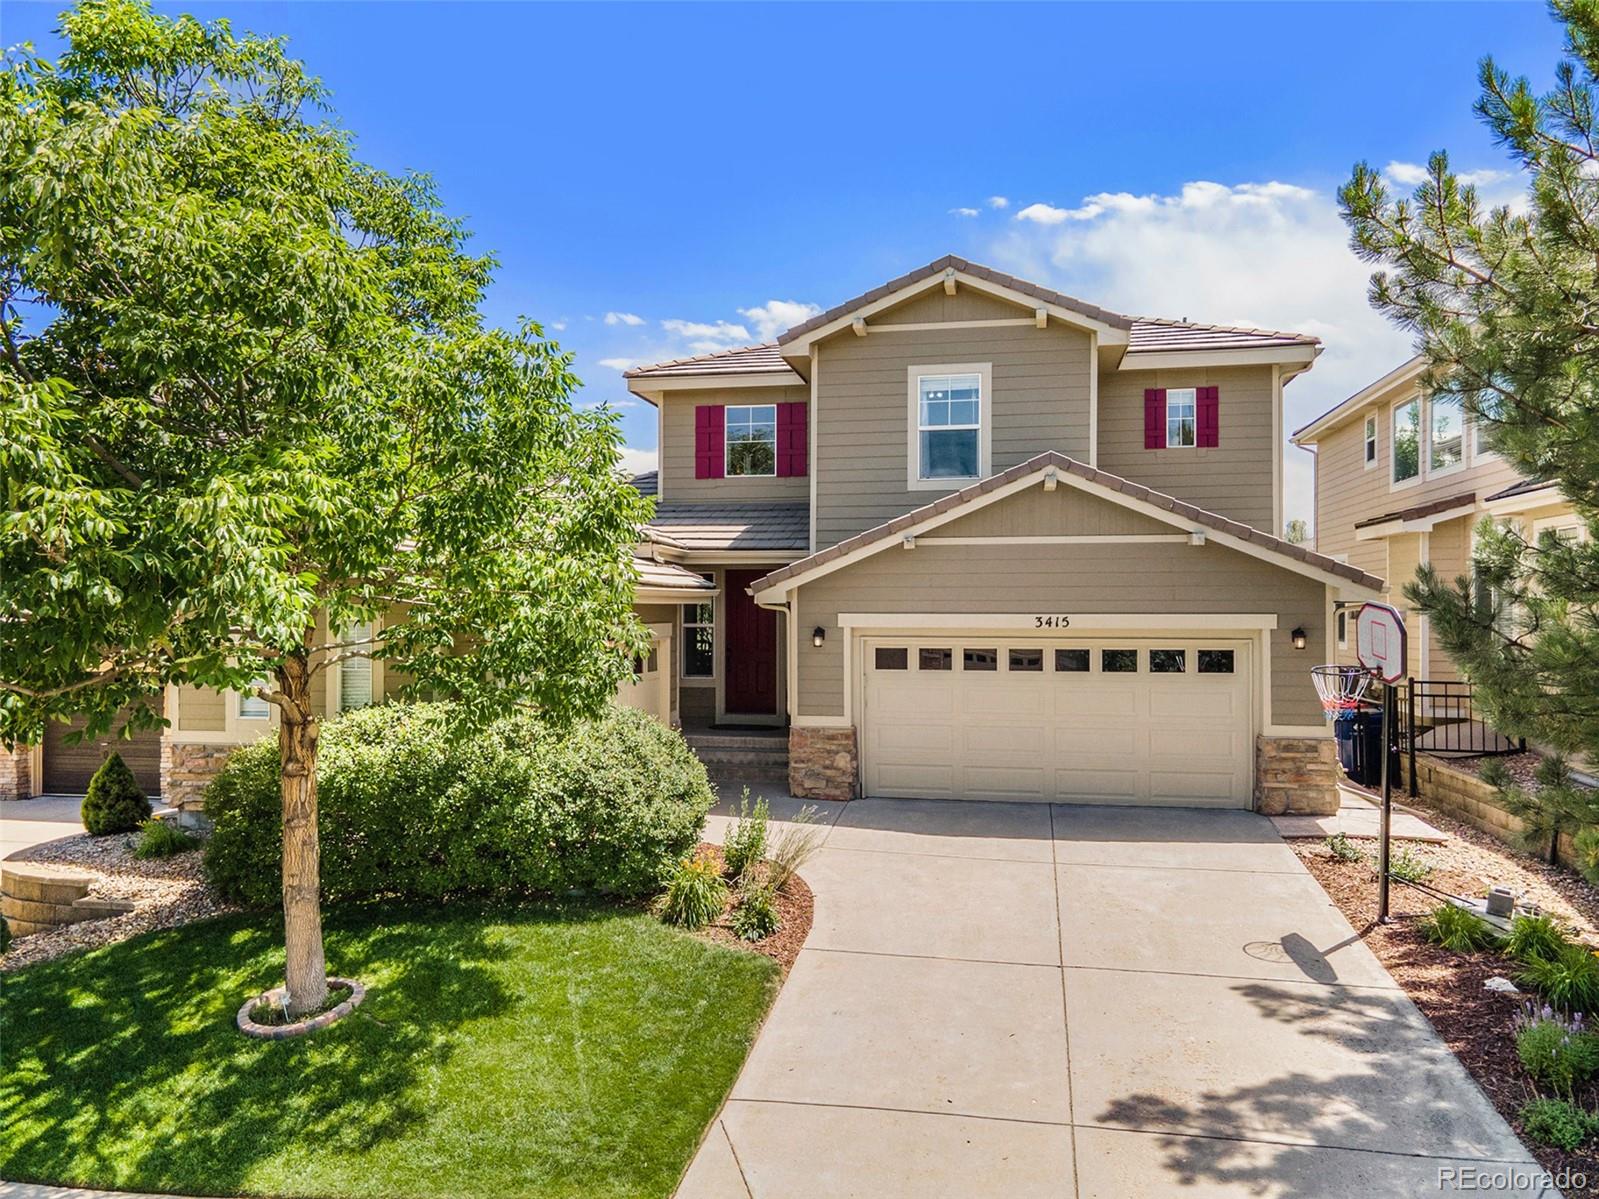 3415  westbrook lane, highlands ranch sold home. Closed on 2024-04-26 for $950,000.